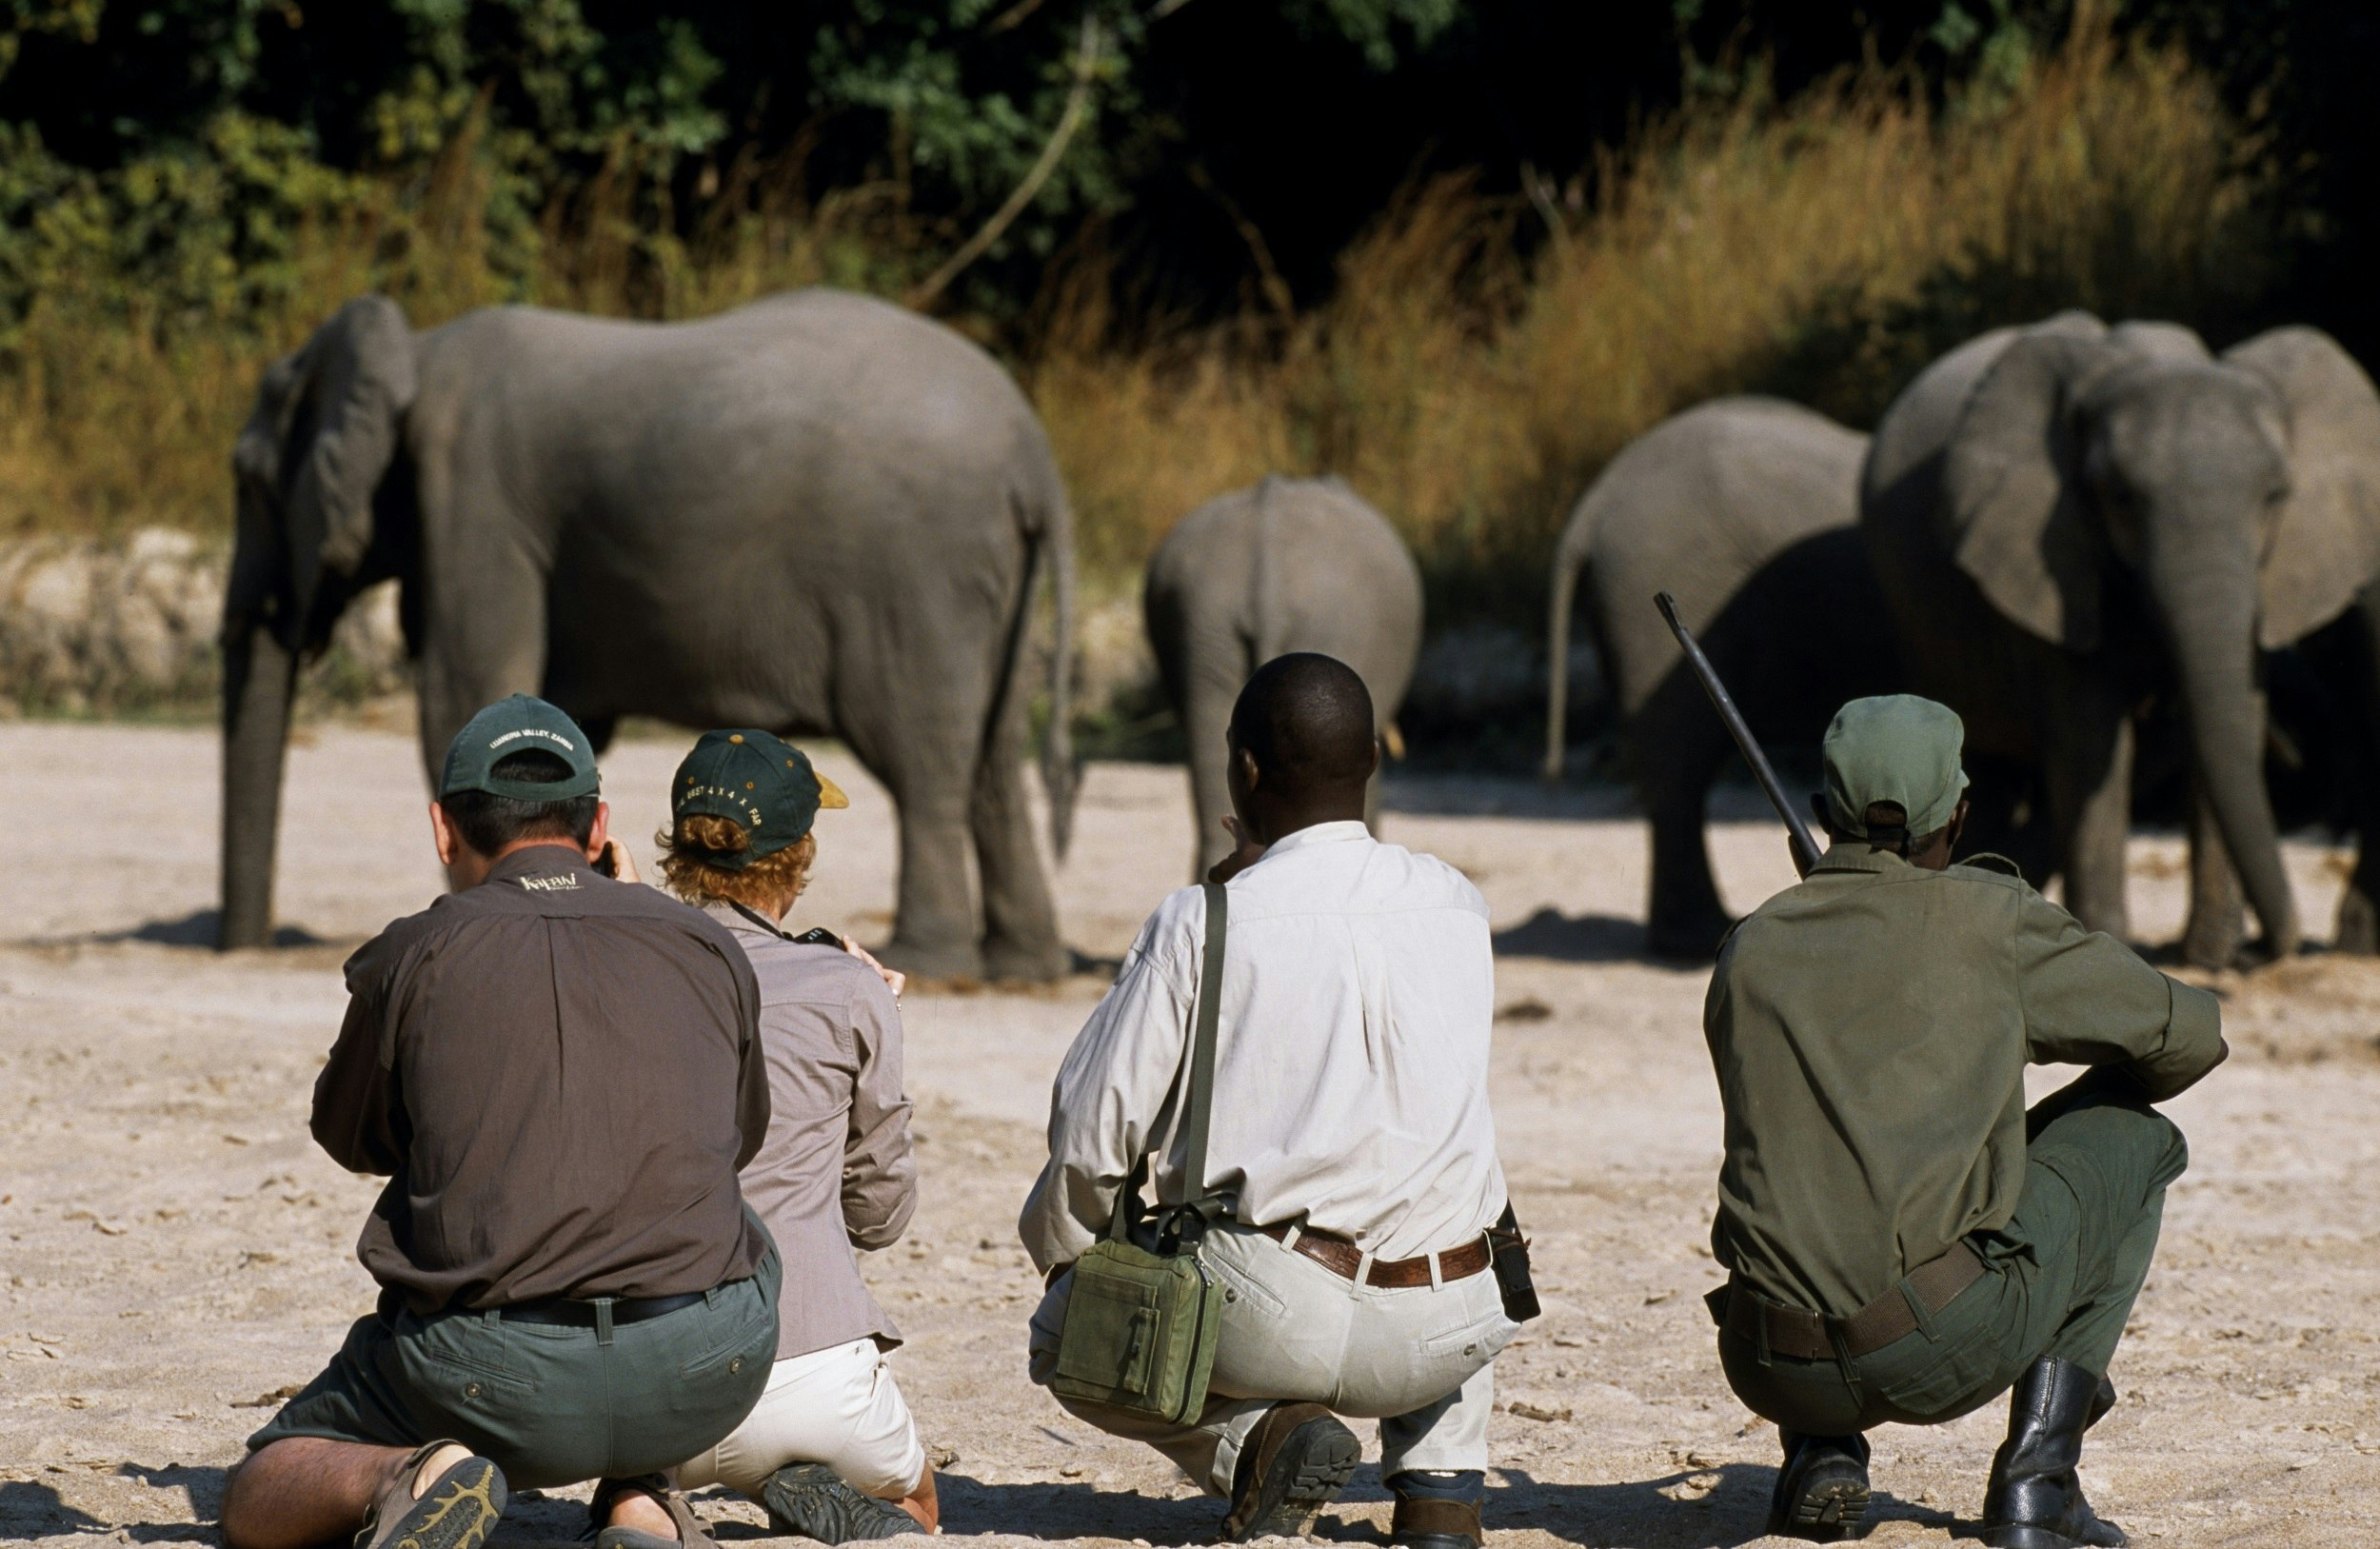 Two safari-goers squat next to an armed ranger and guide in a dry river bed, with a herd of elephants in front of them.